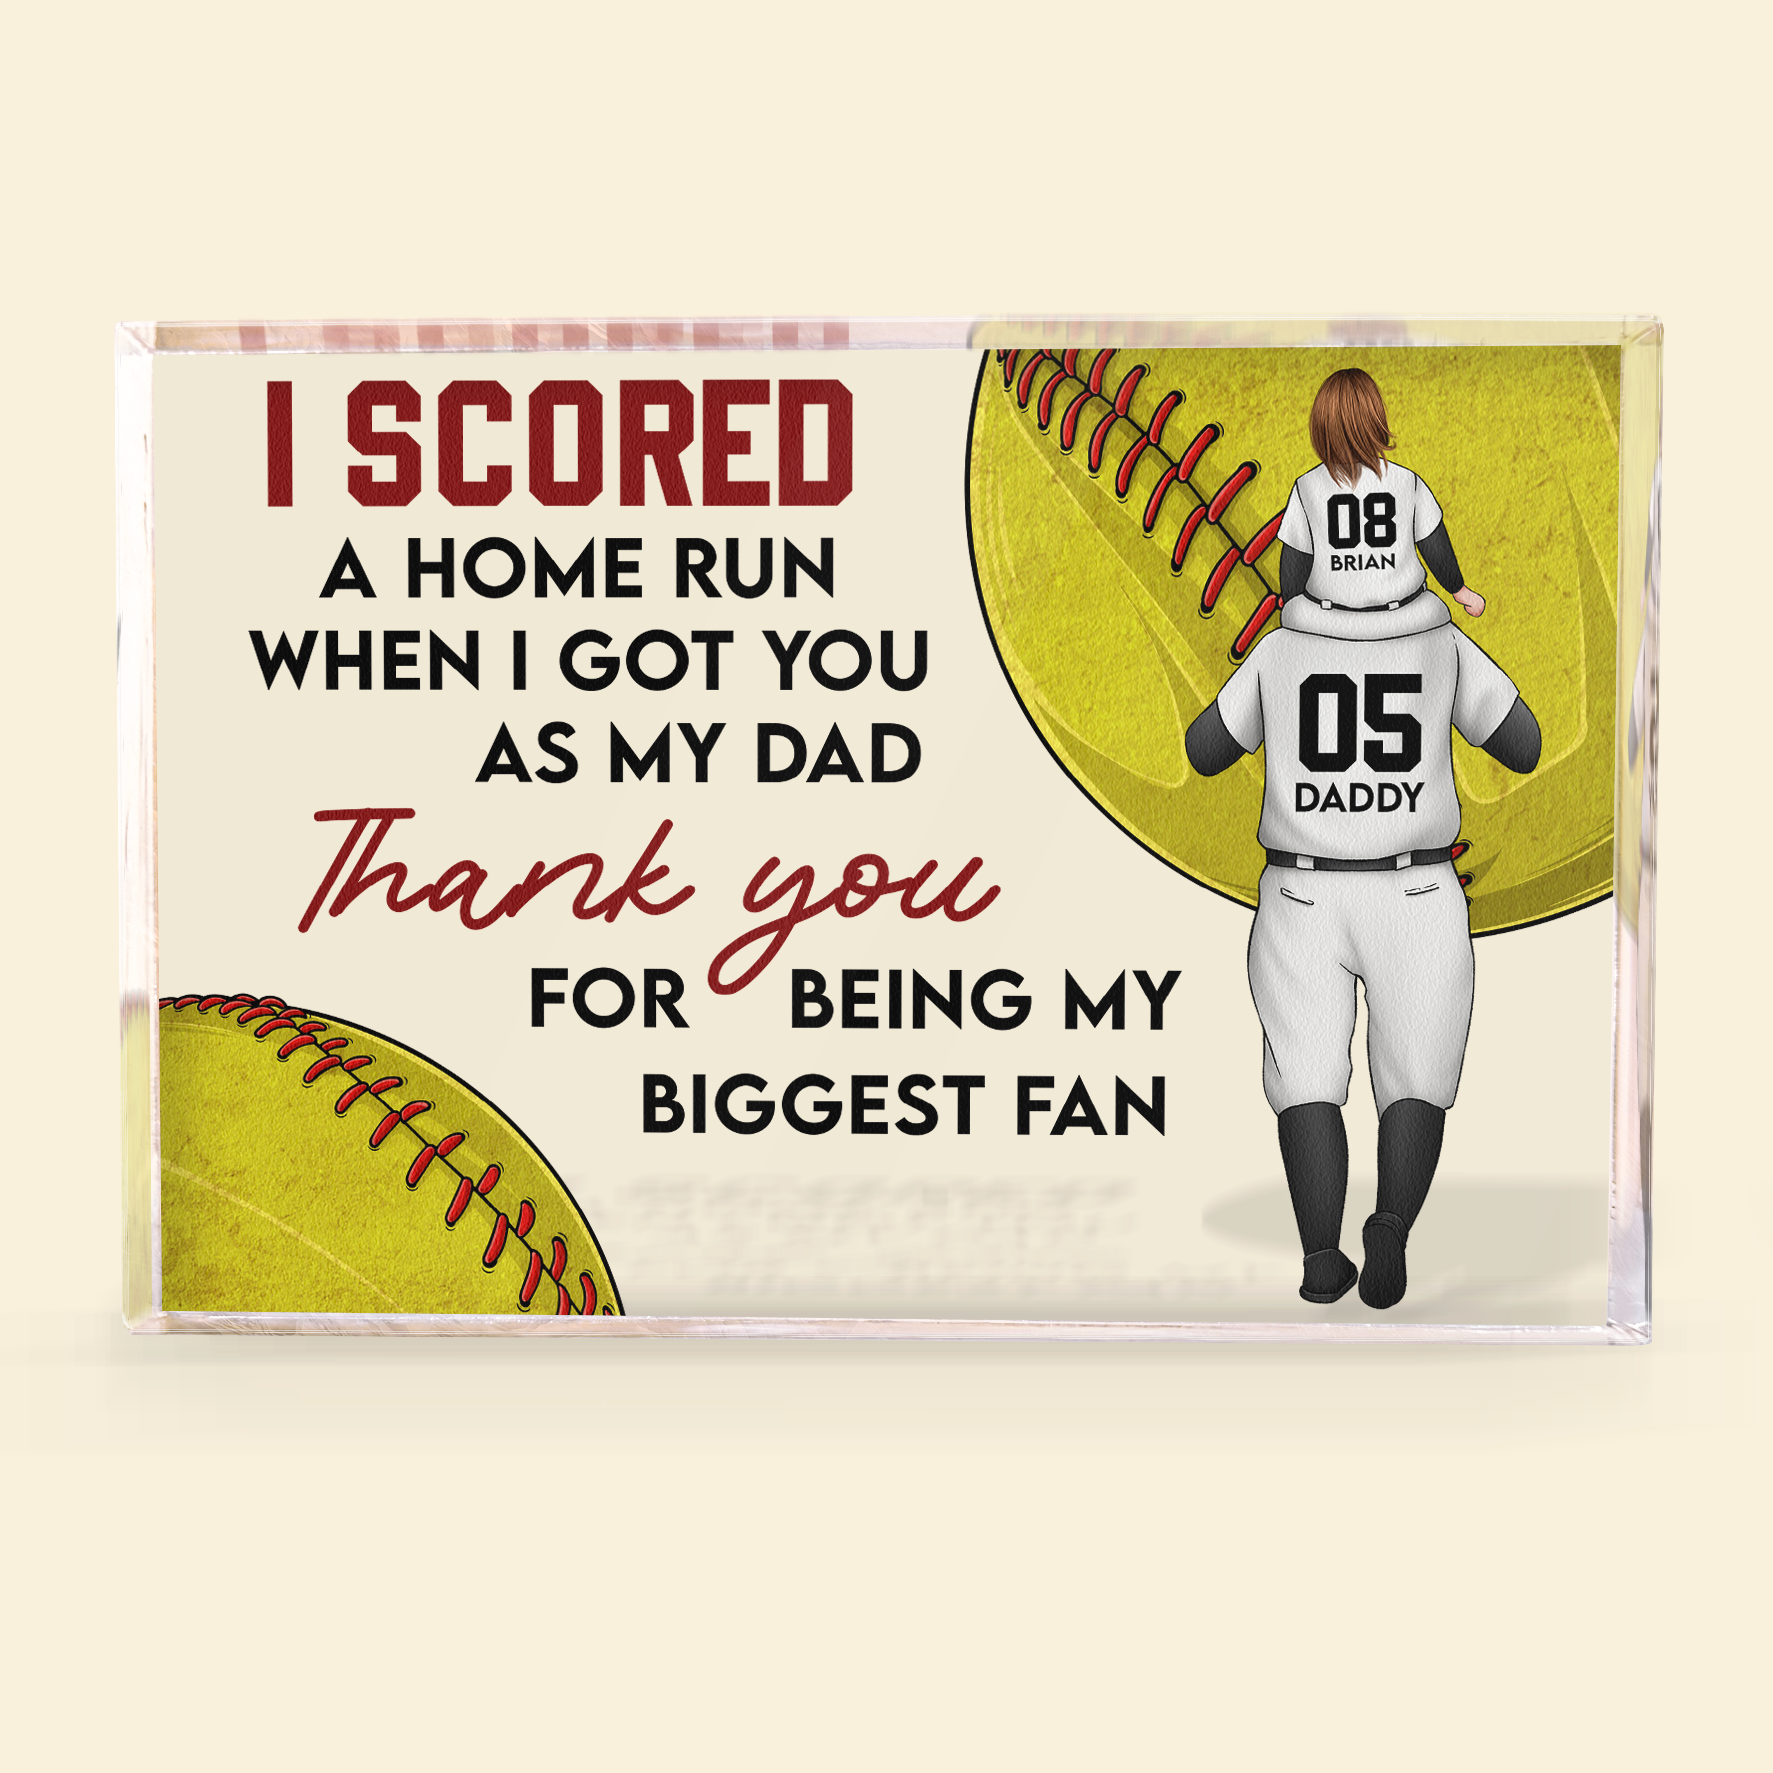 I Scored A Home Run Softball Dad - Personalized Rectangle Acrylic Plaque